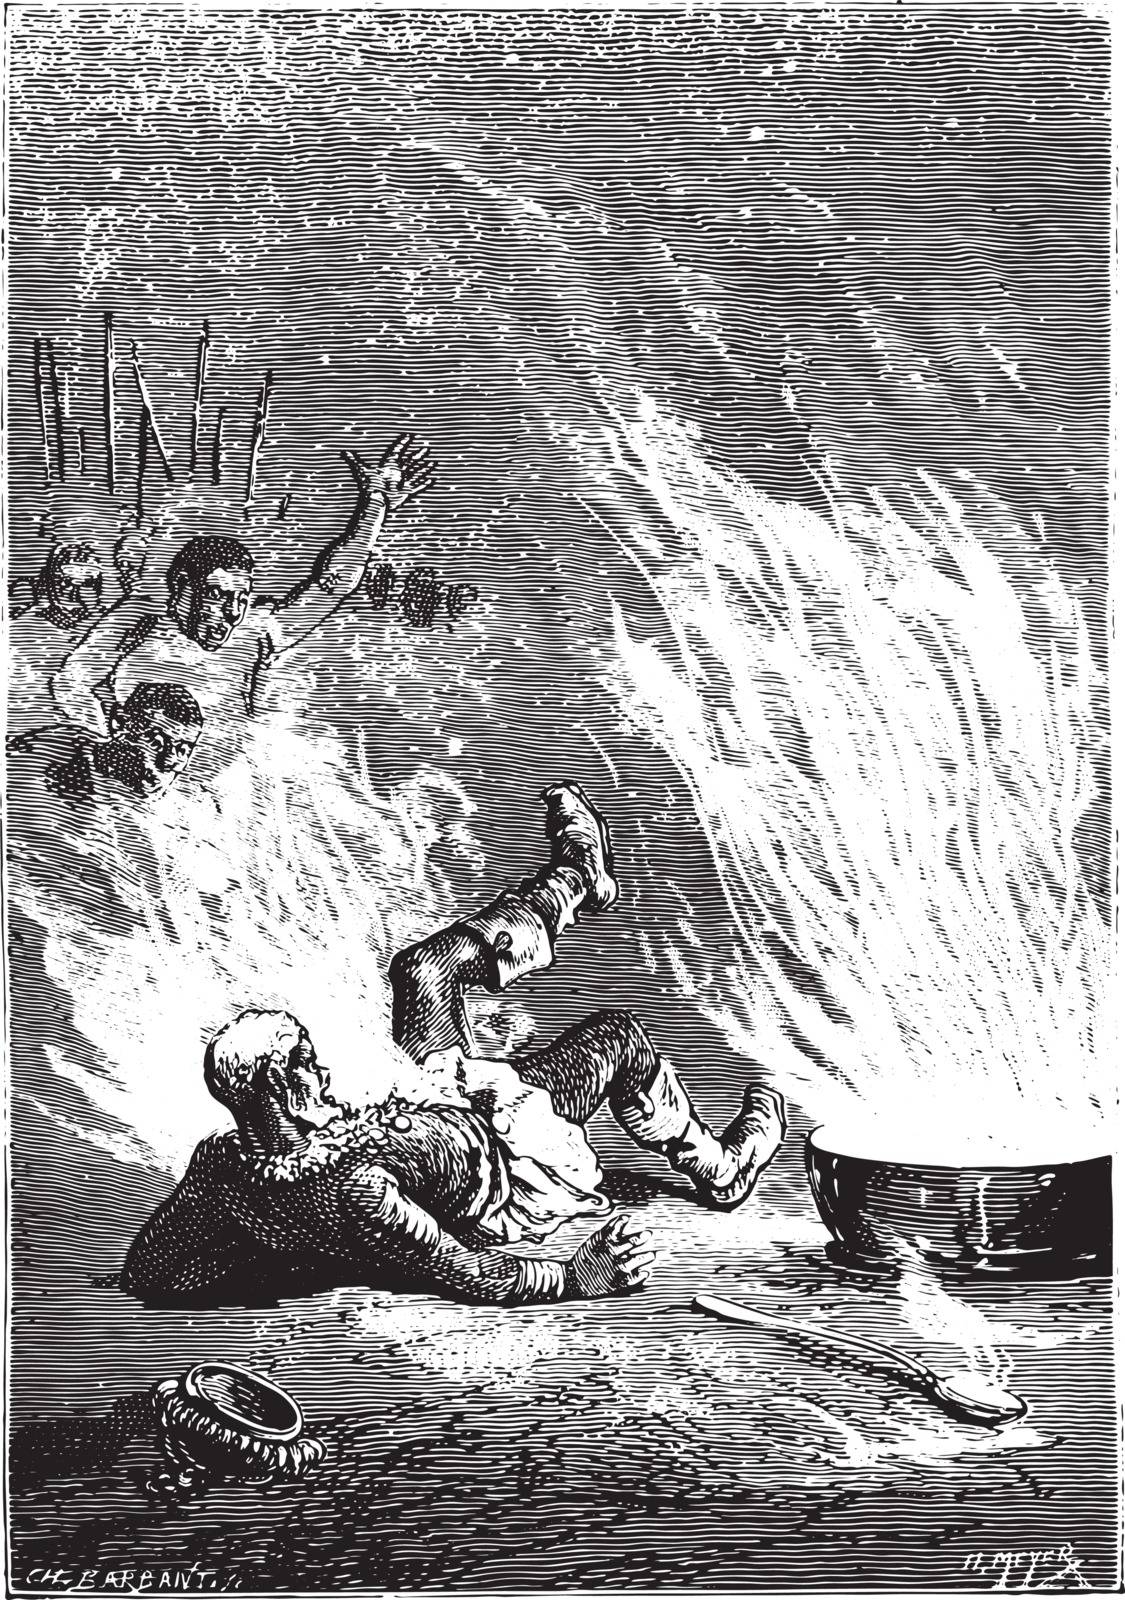 The king had caught fire like an oil tank, vintage engraved illustration.
